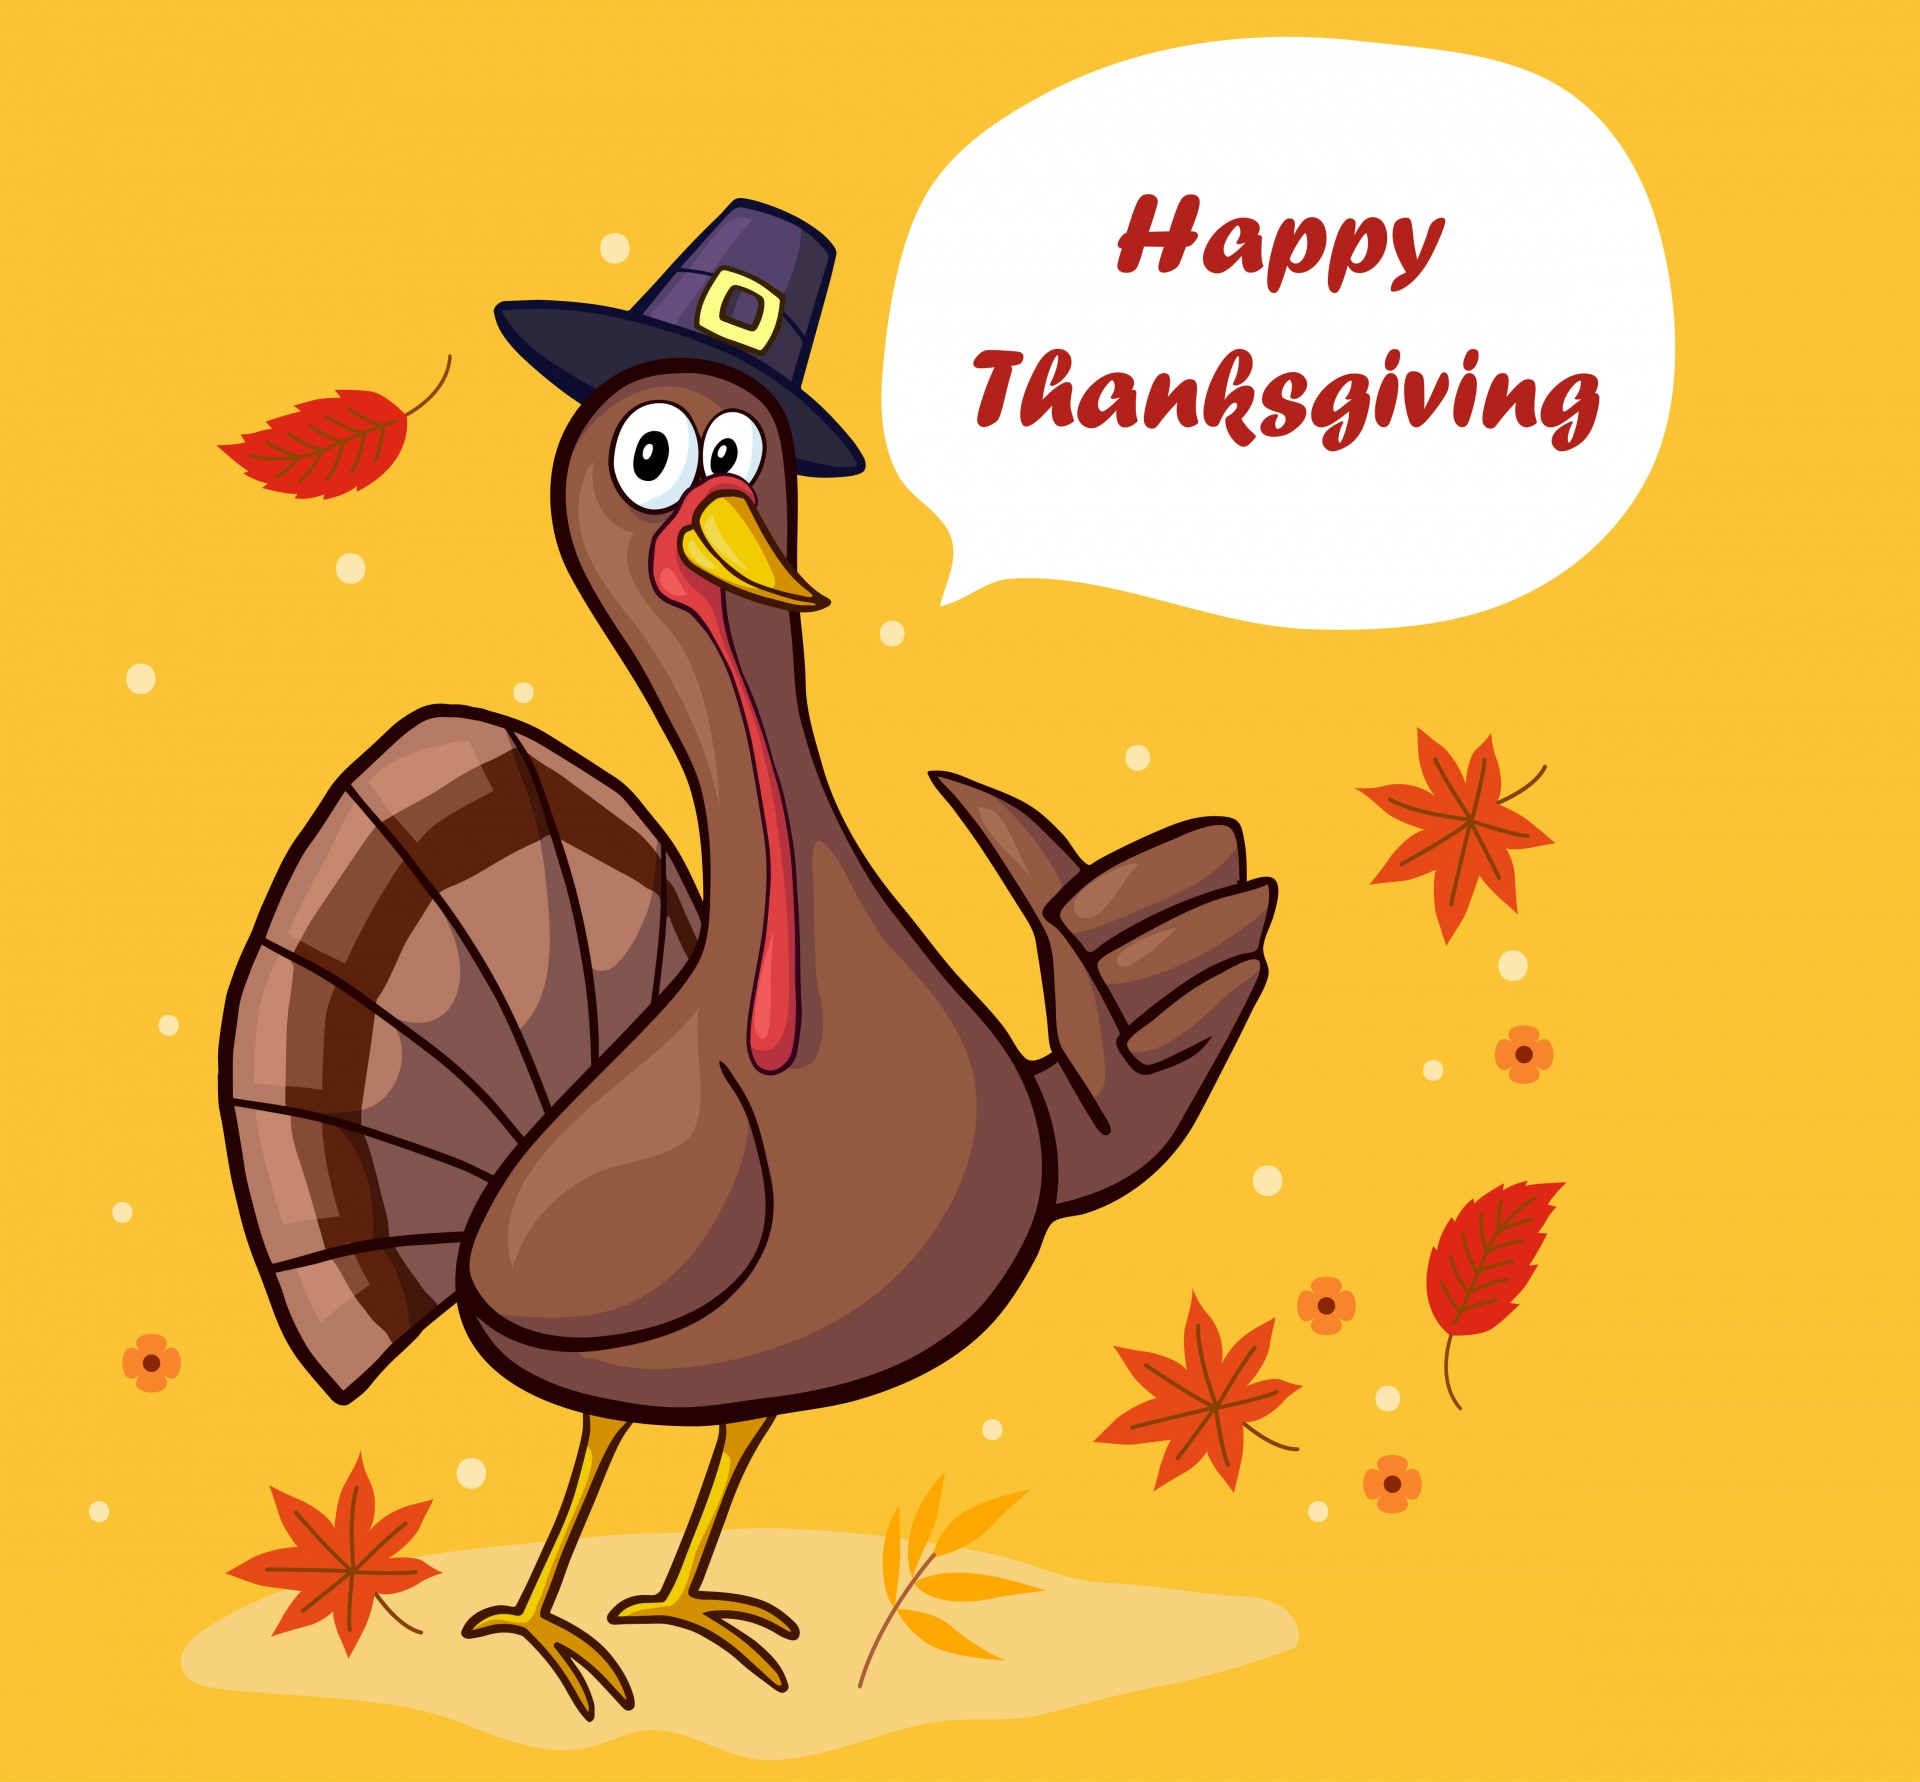 Thanksgiving background of cartoon turkey and autumn, fall leaves card template, with speech bubble happy thanksgiving